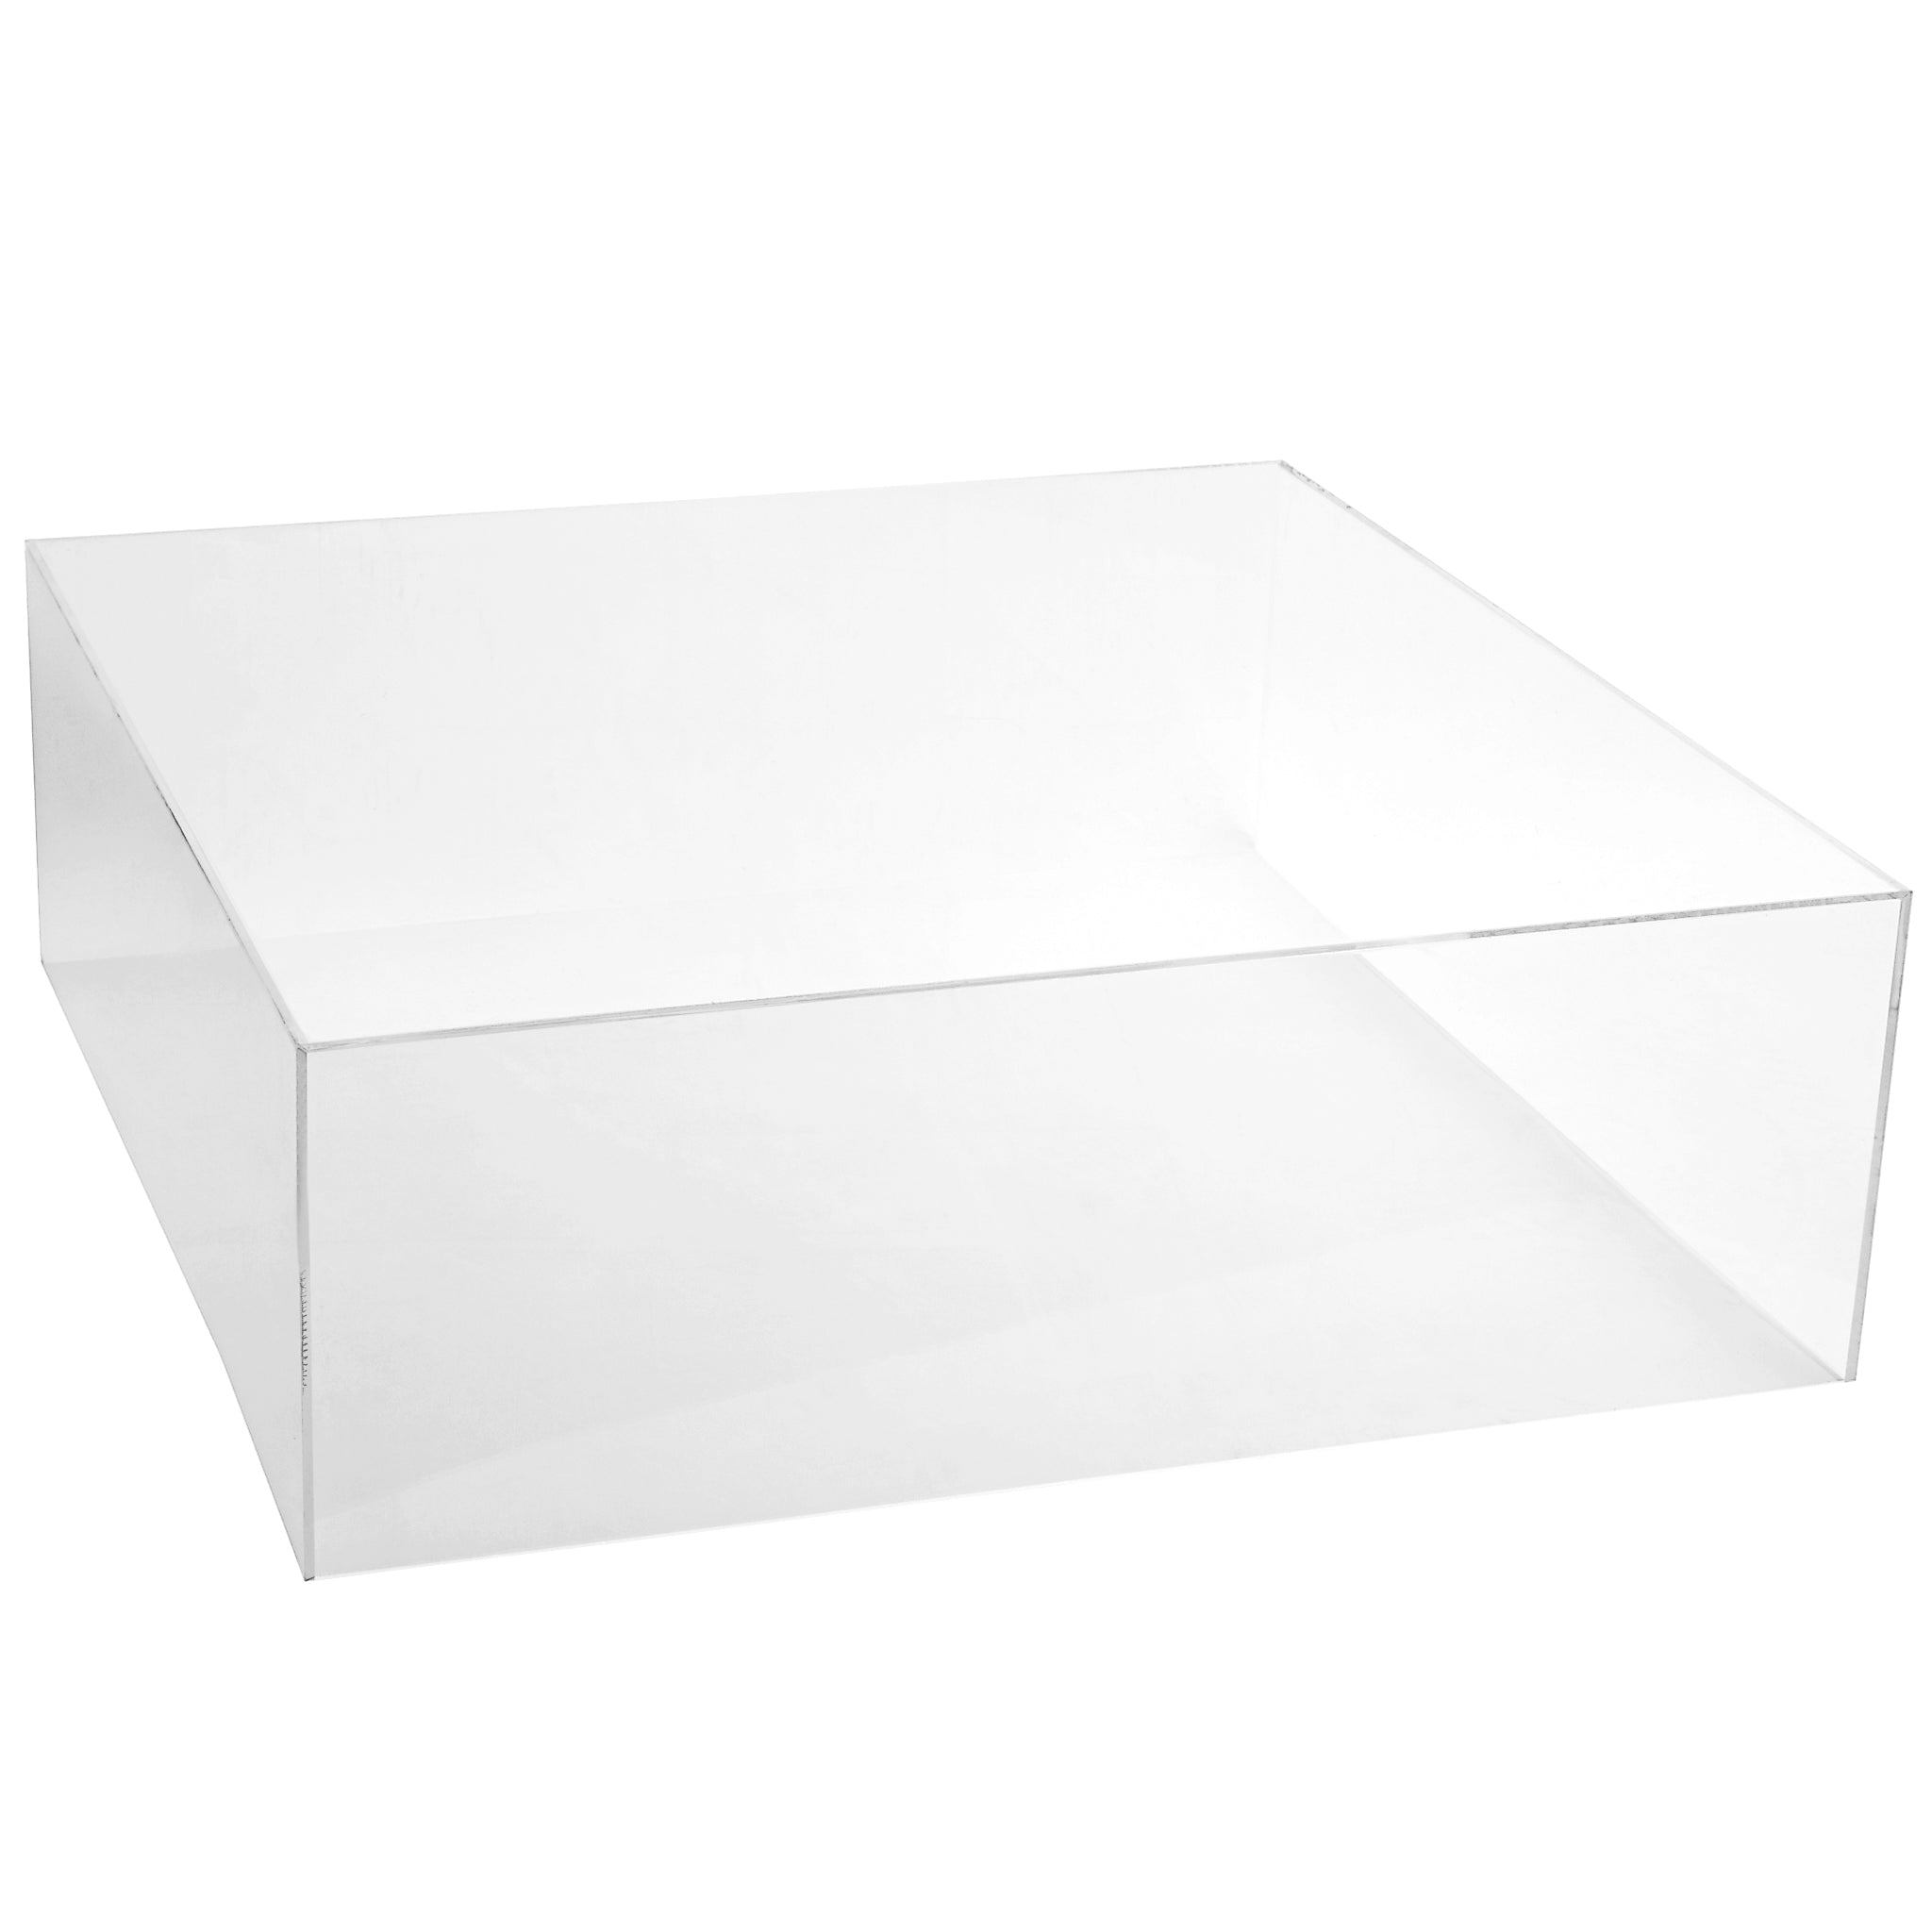 Clear Stands White Large Square Acrylic Display Cube, 20 Inch